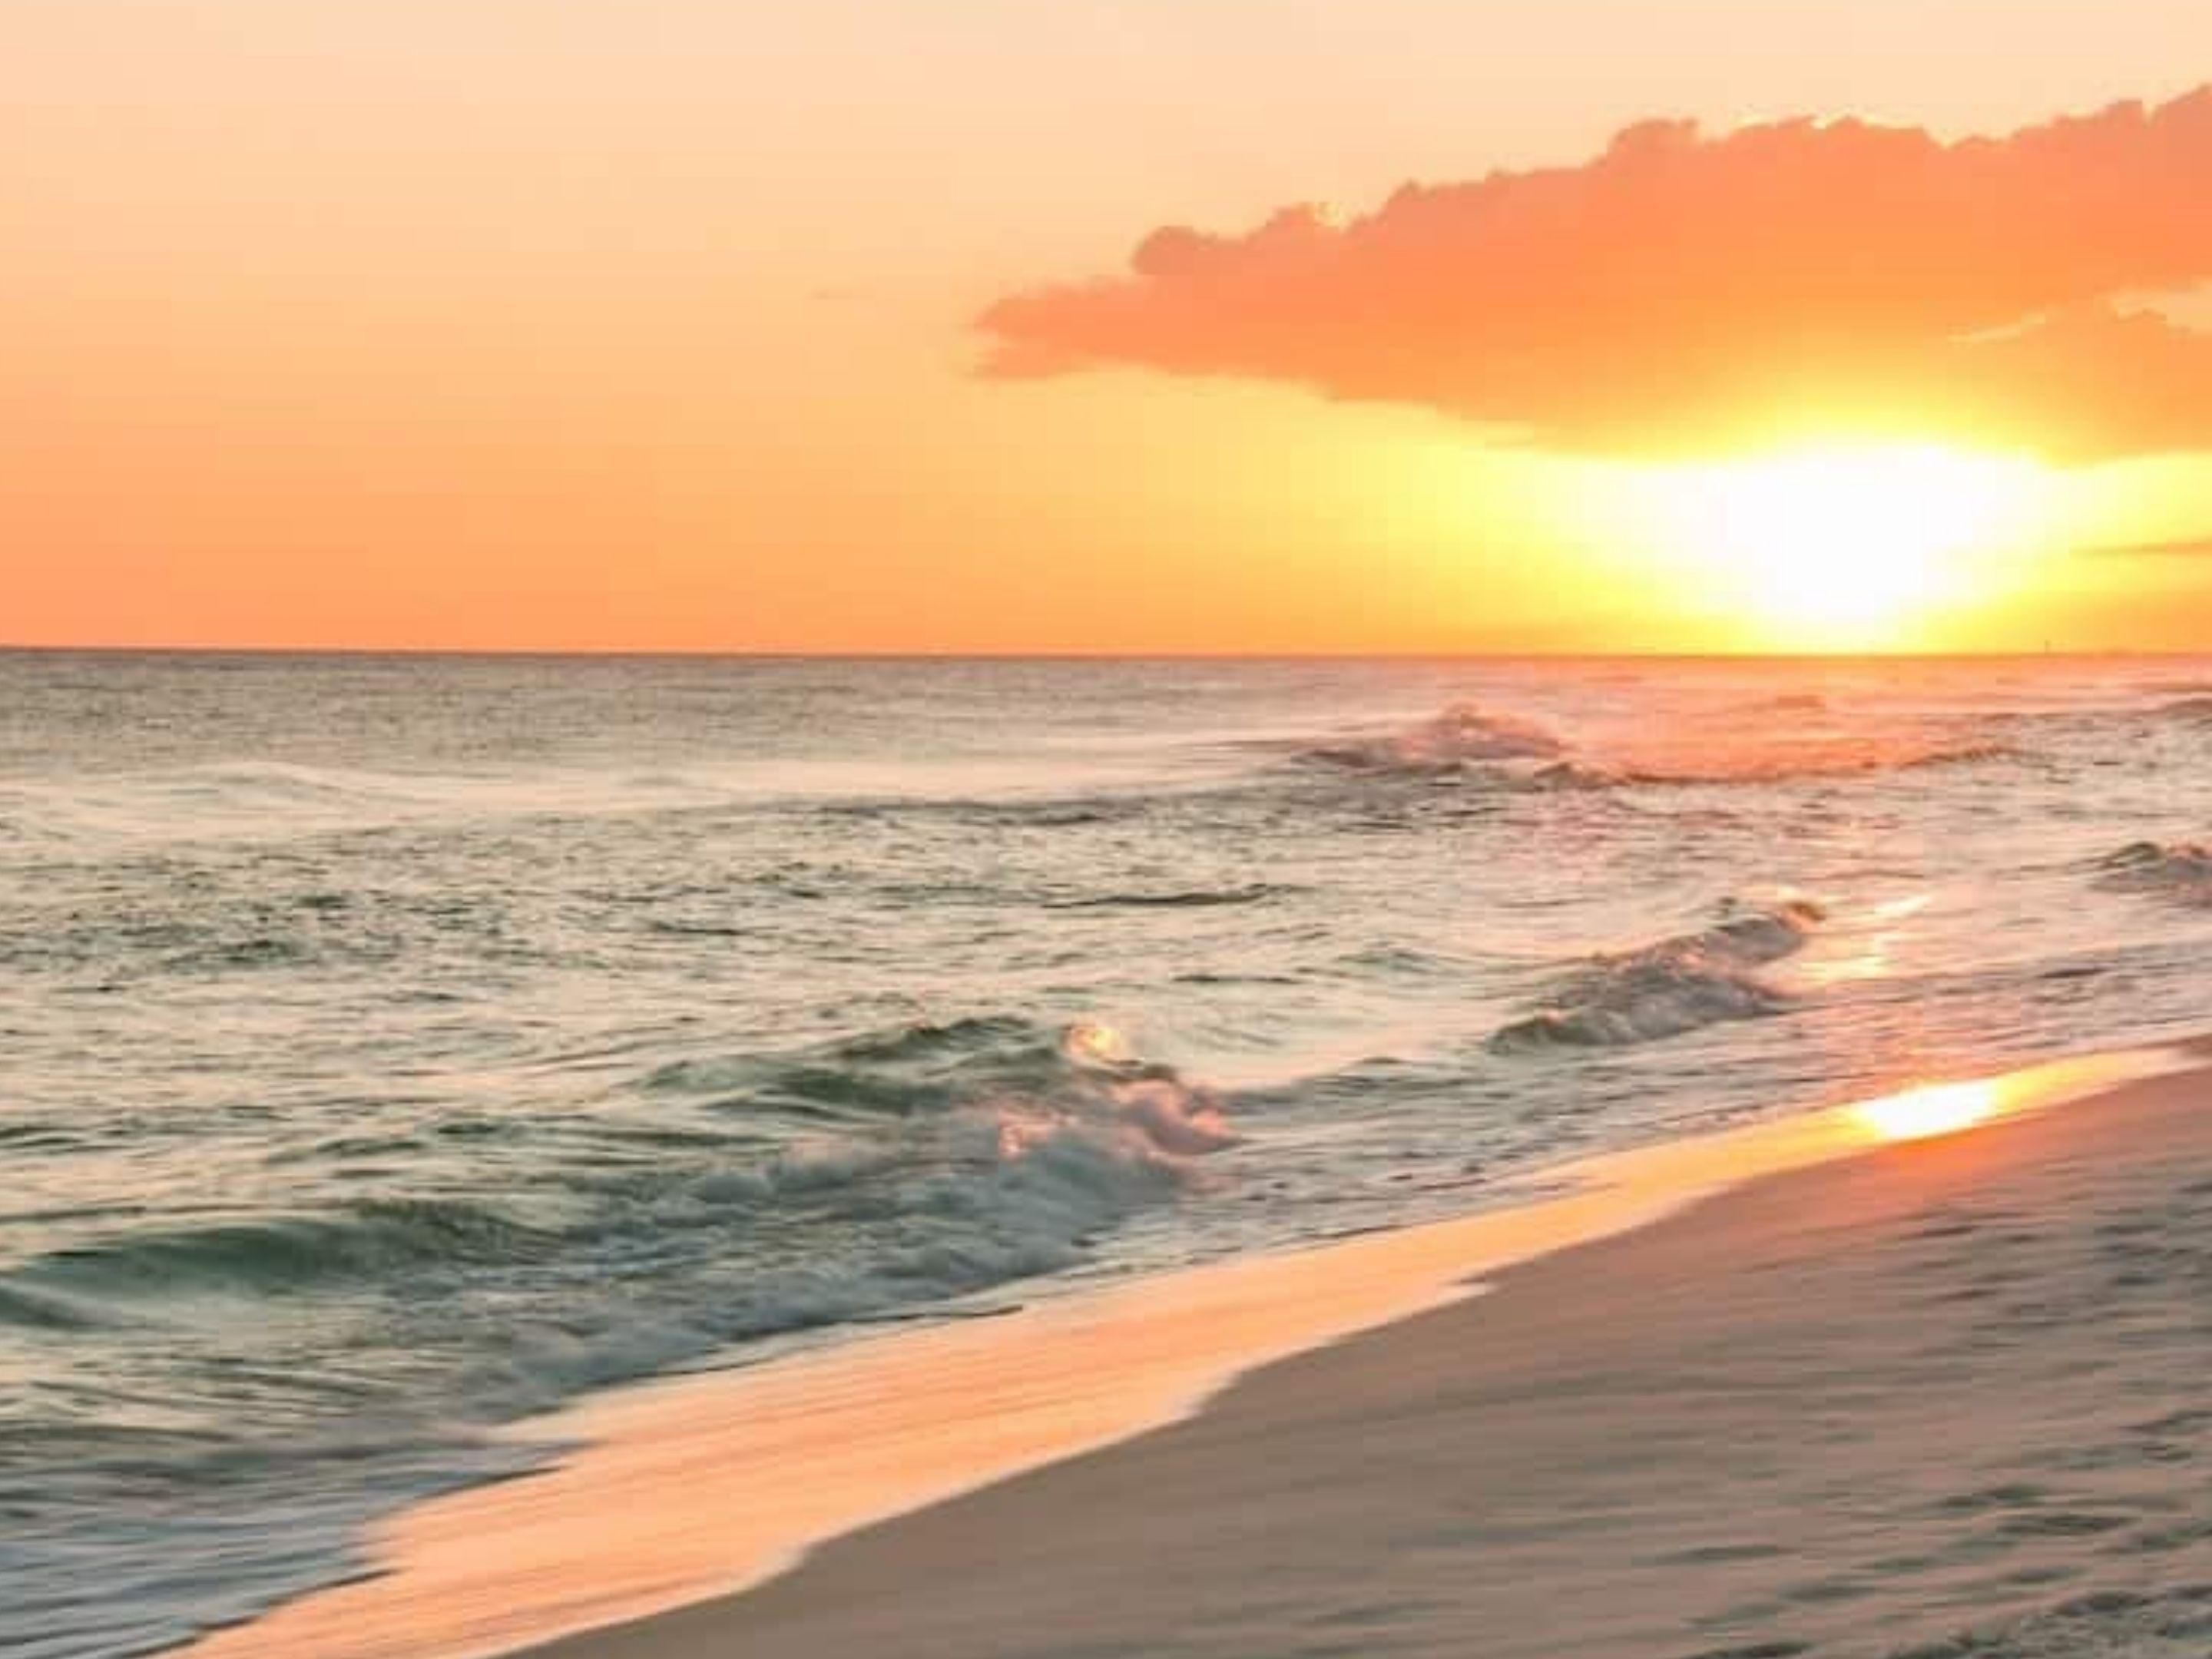 Book Now and Watch Sunrises in FL